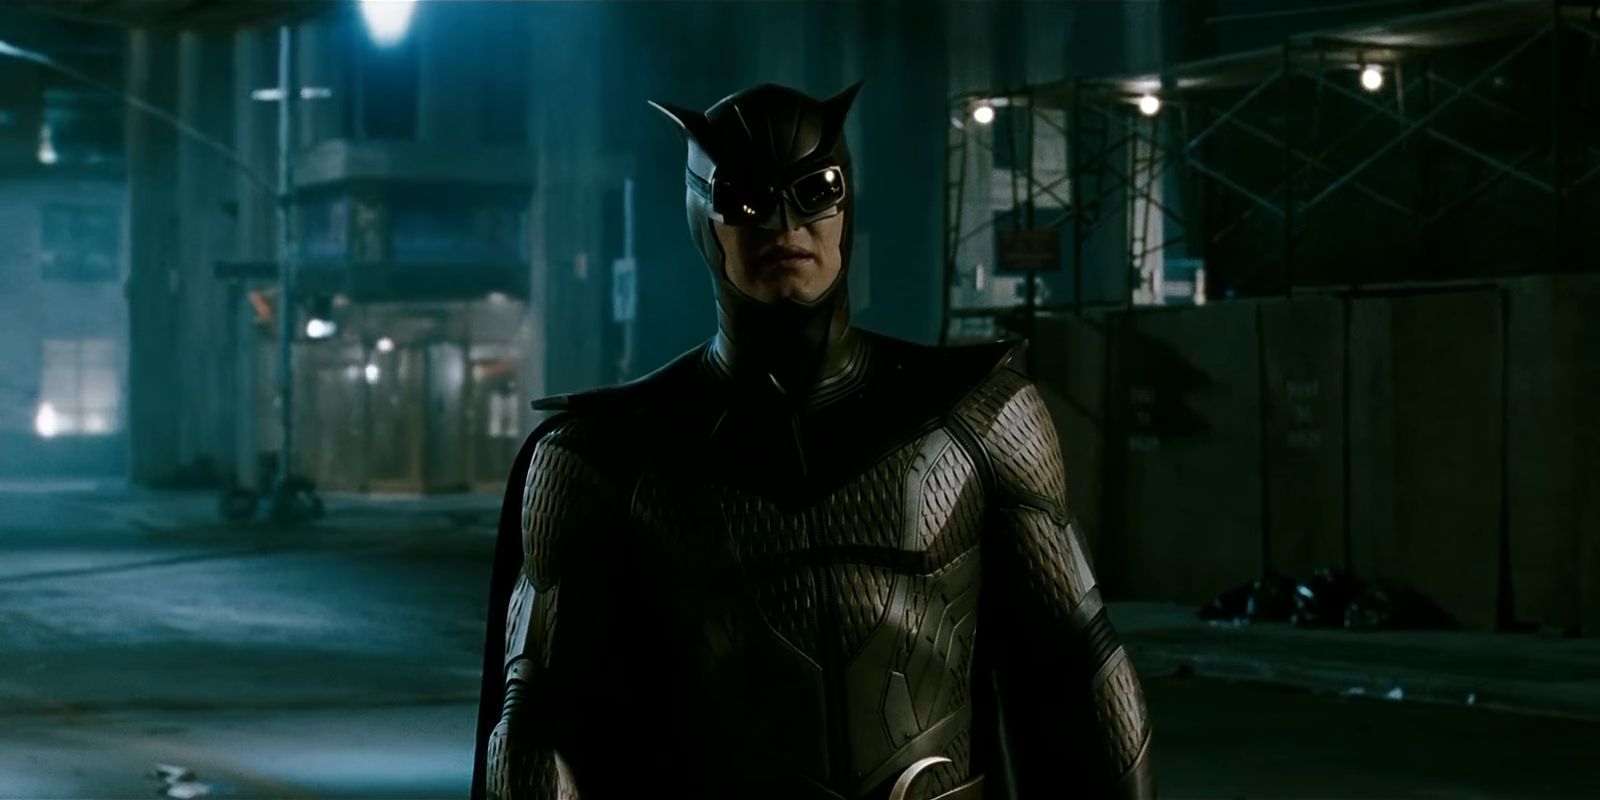 Nite Owl II on the streets of New York City in Watchmen 2009